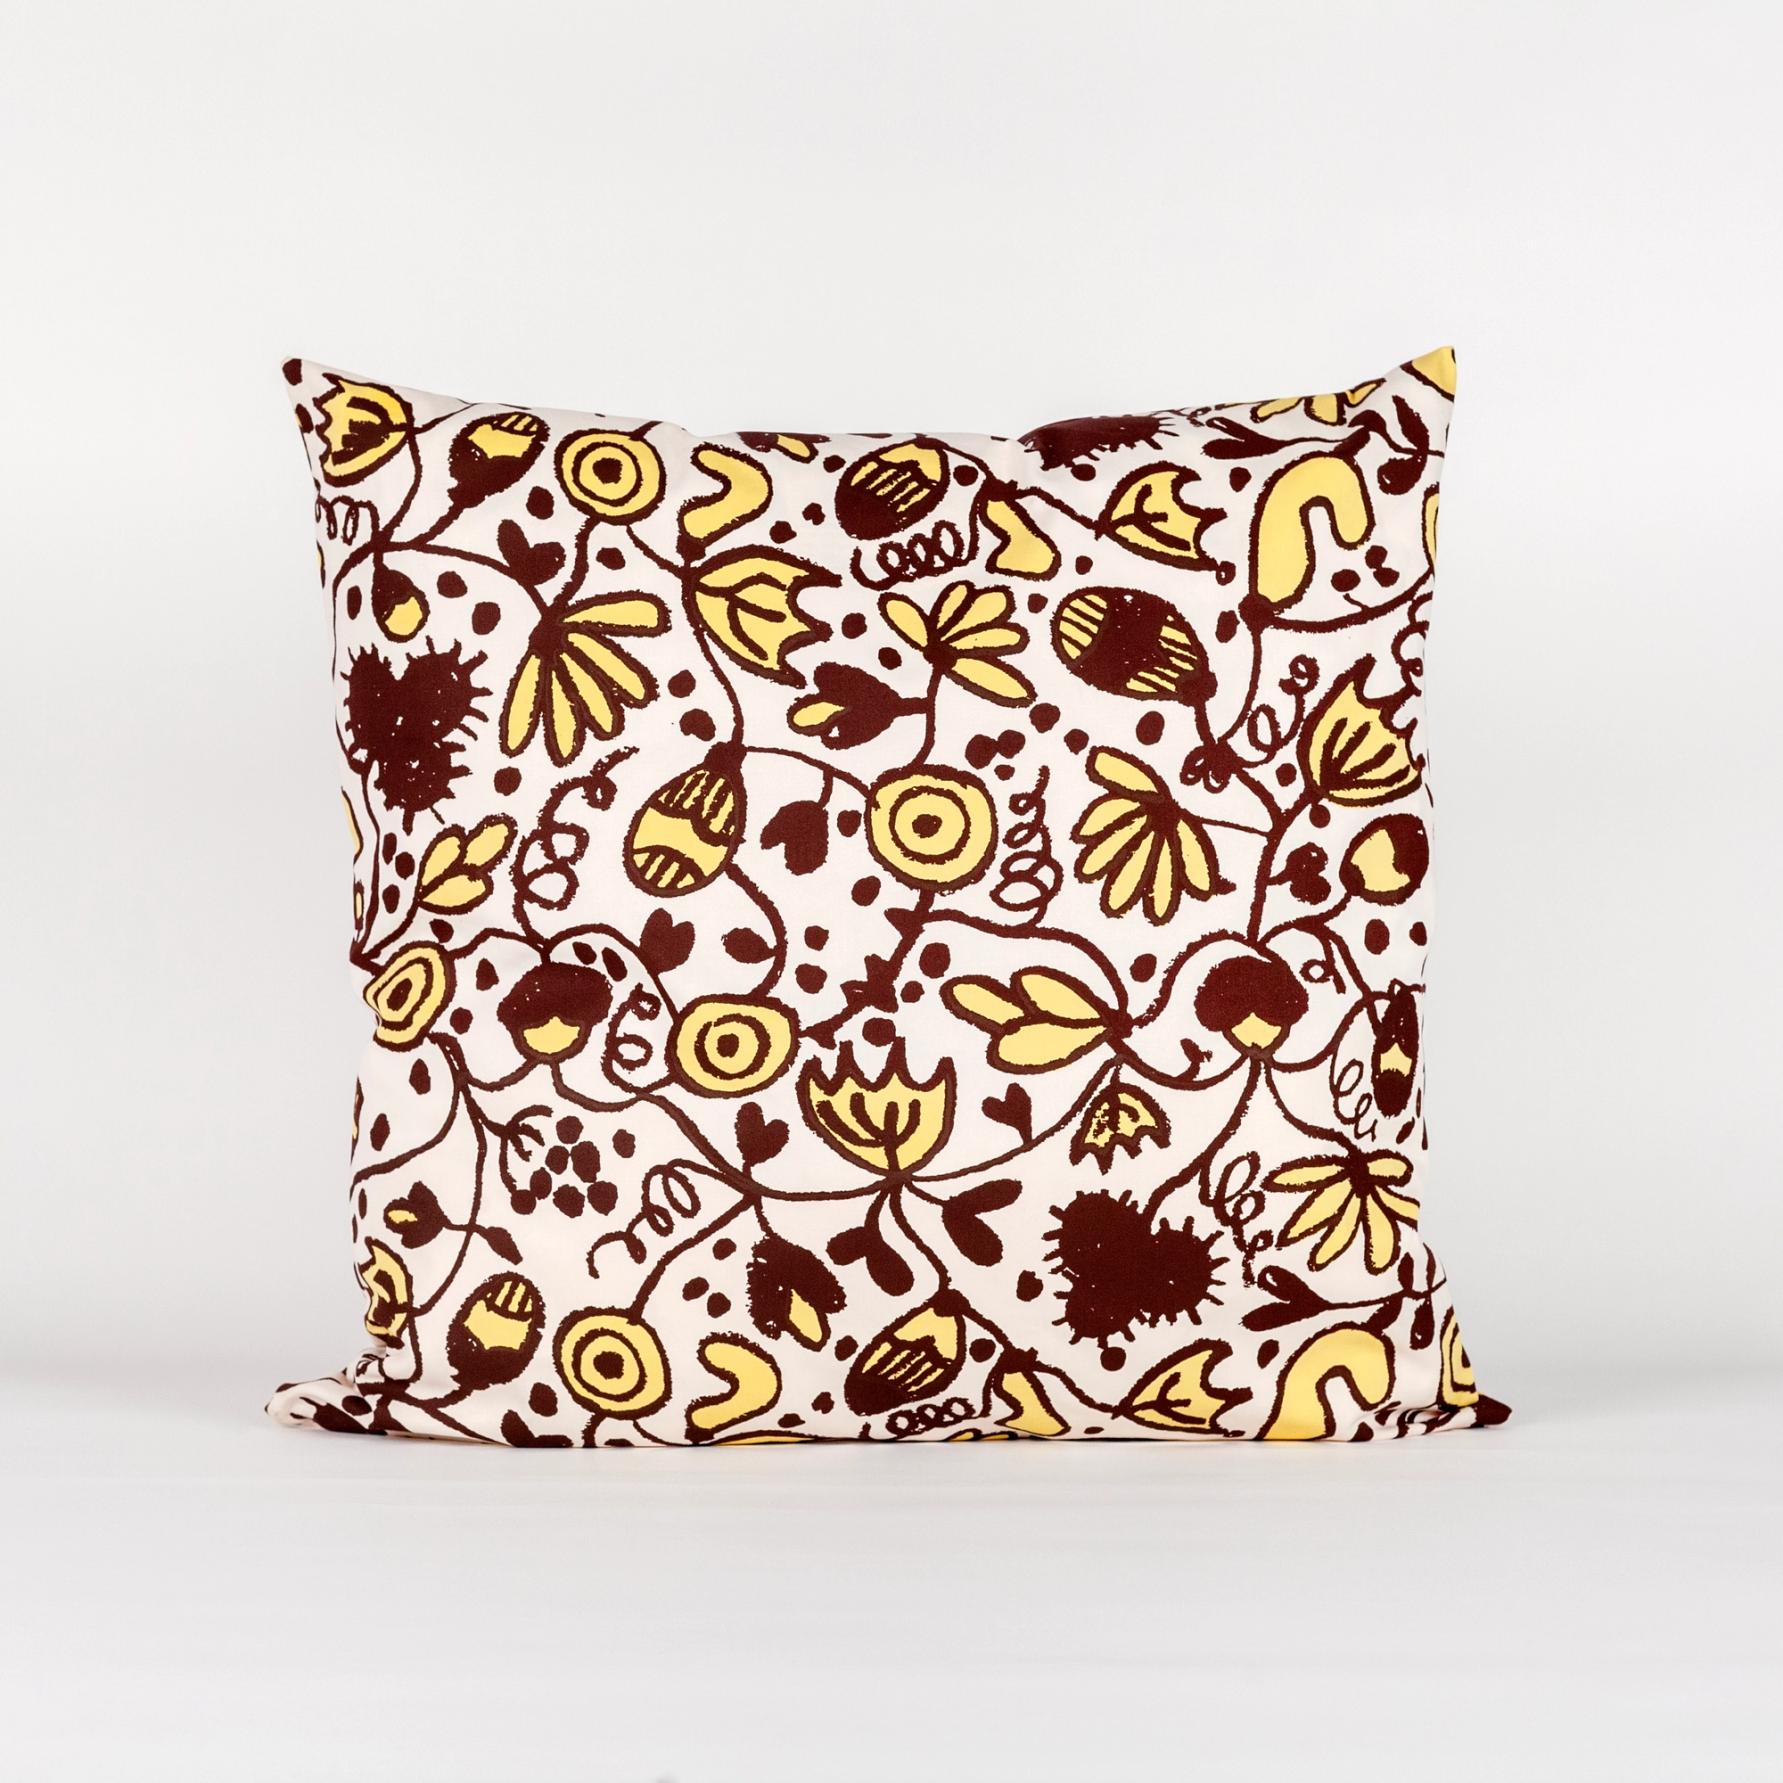 A square pillow made of fabric yardage consisting of brown and yellow floral motifs.